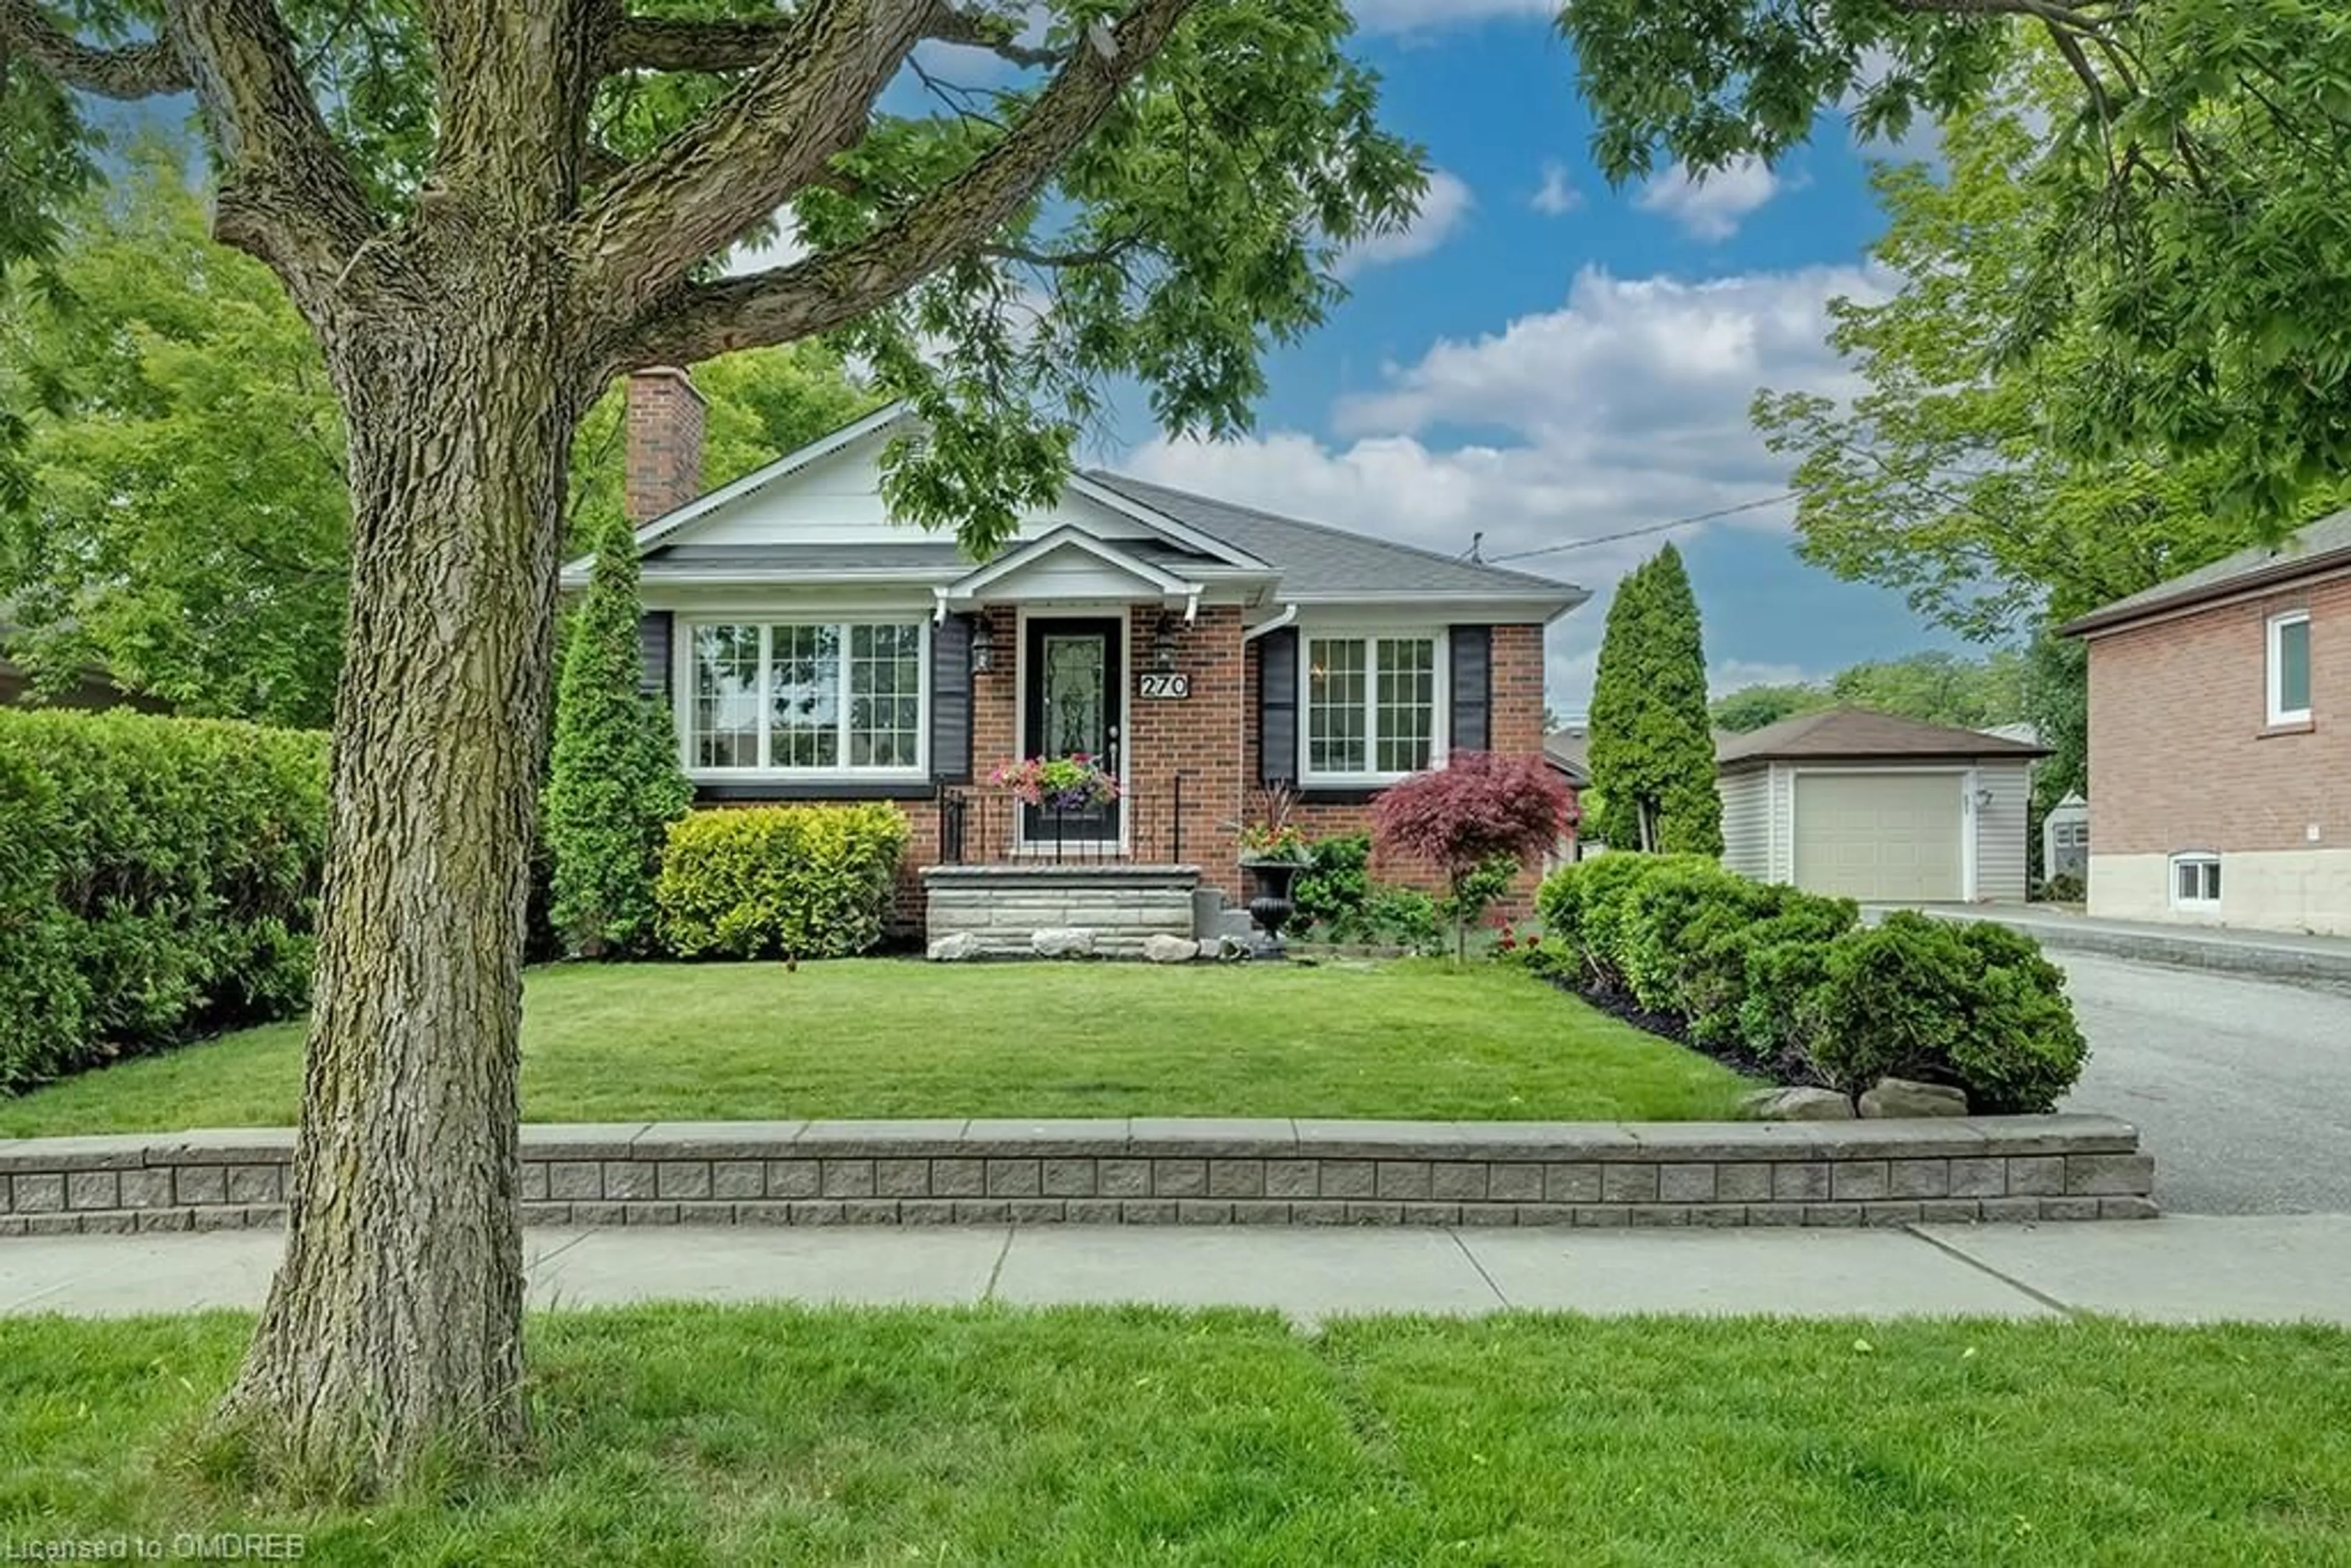 Home with brick exterior material for 270 Felan Ave, Oakville Ontario L6K 2X6